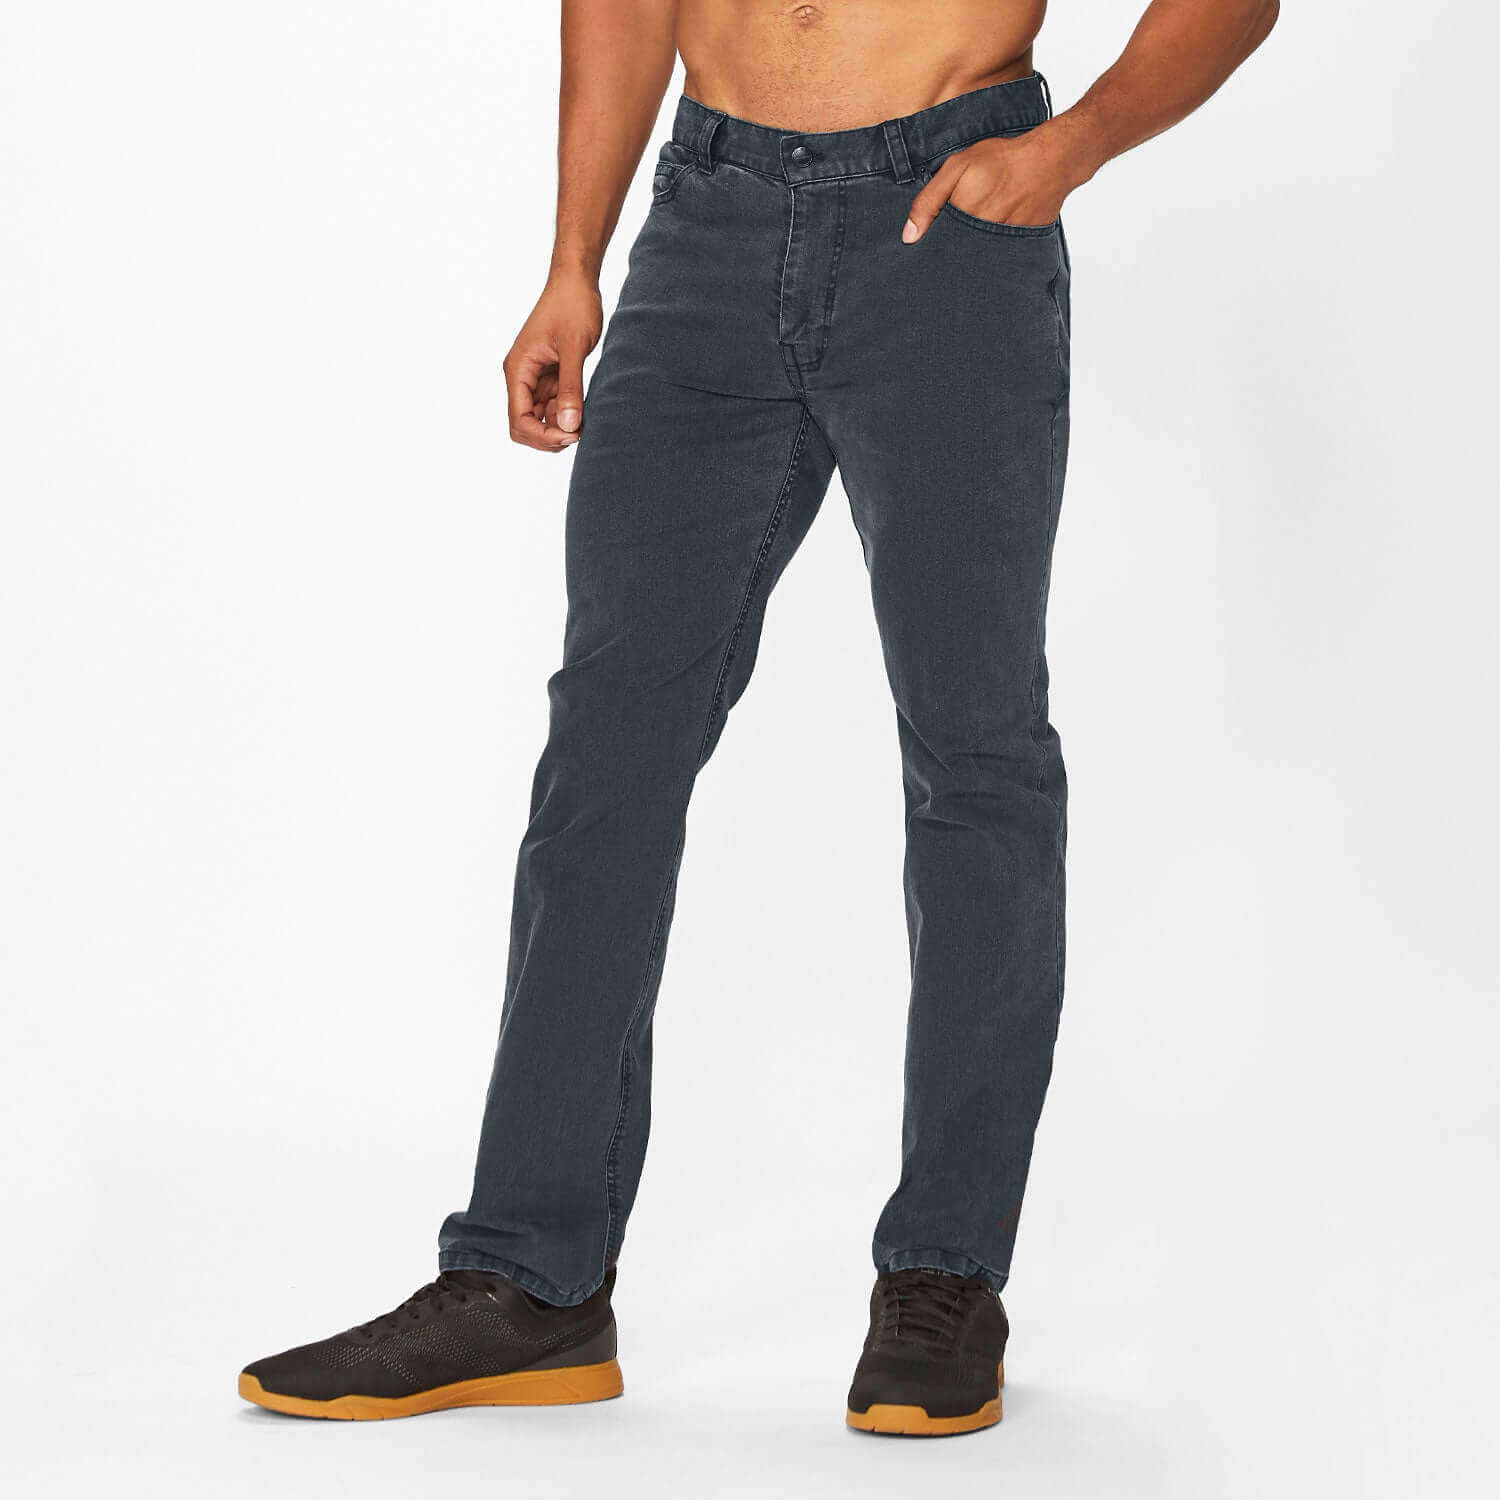 Athletic Fit Stretch Jean Pant